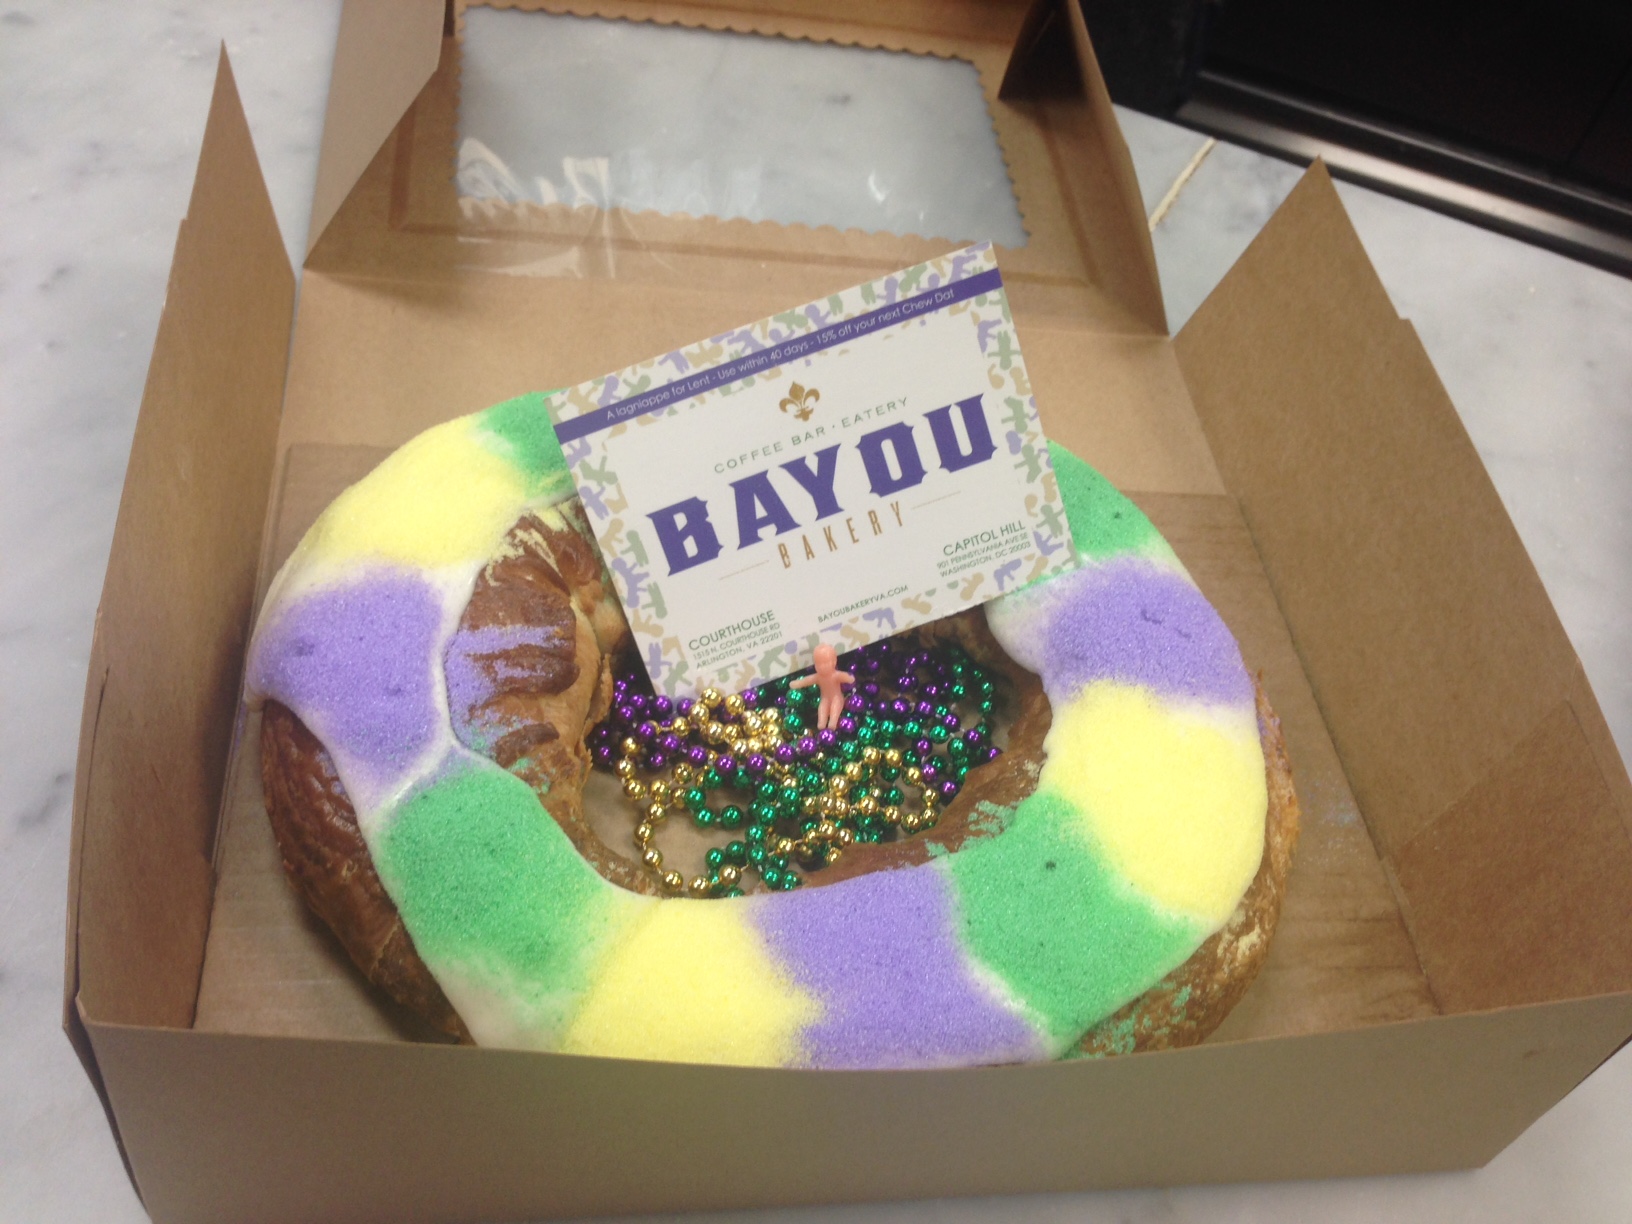 Let them eat king cake: The history, ingredients behind the Mardi Gras classic